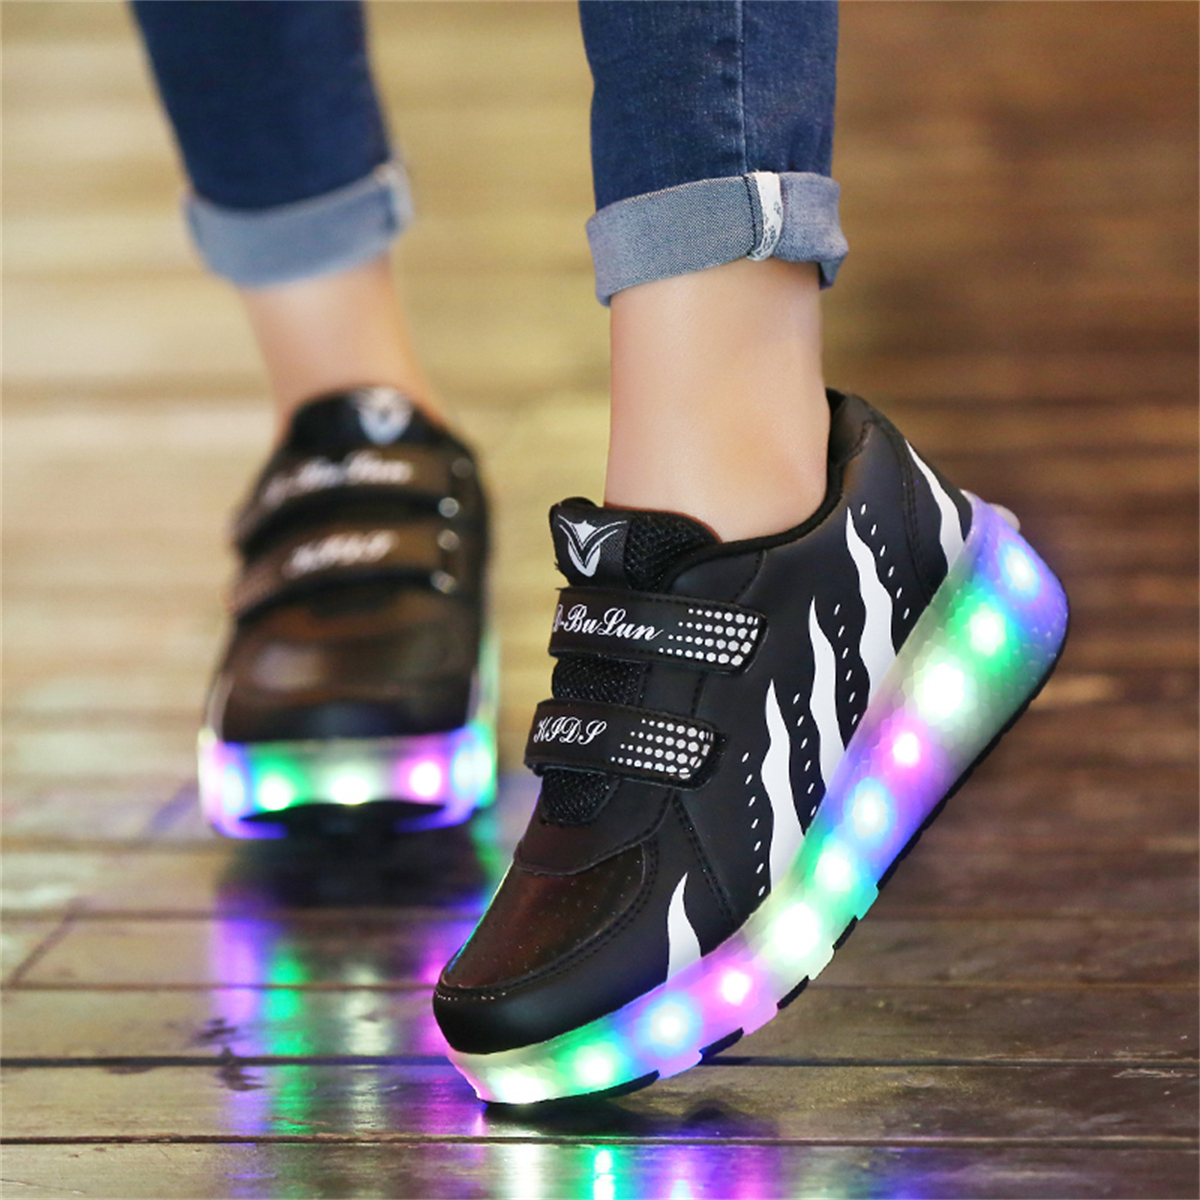 Buy LED Shoes For Men Online - Vostro Oled White Men Shoes | Clothes in  Noida - Clothers and footear на Salexy.in | 18.03.2019